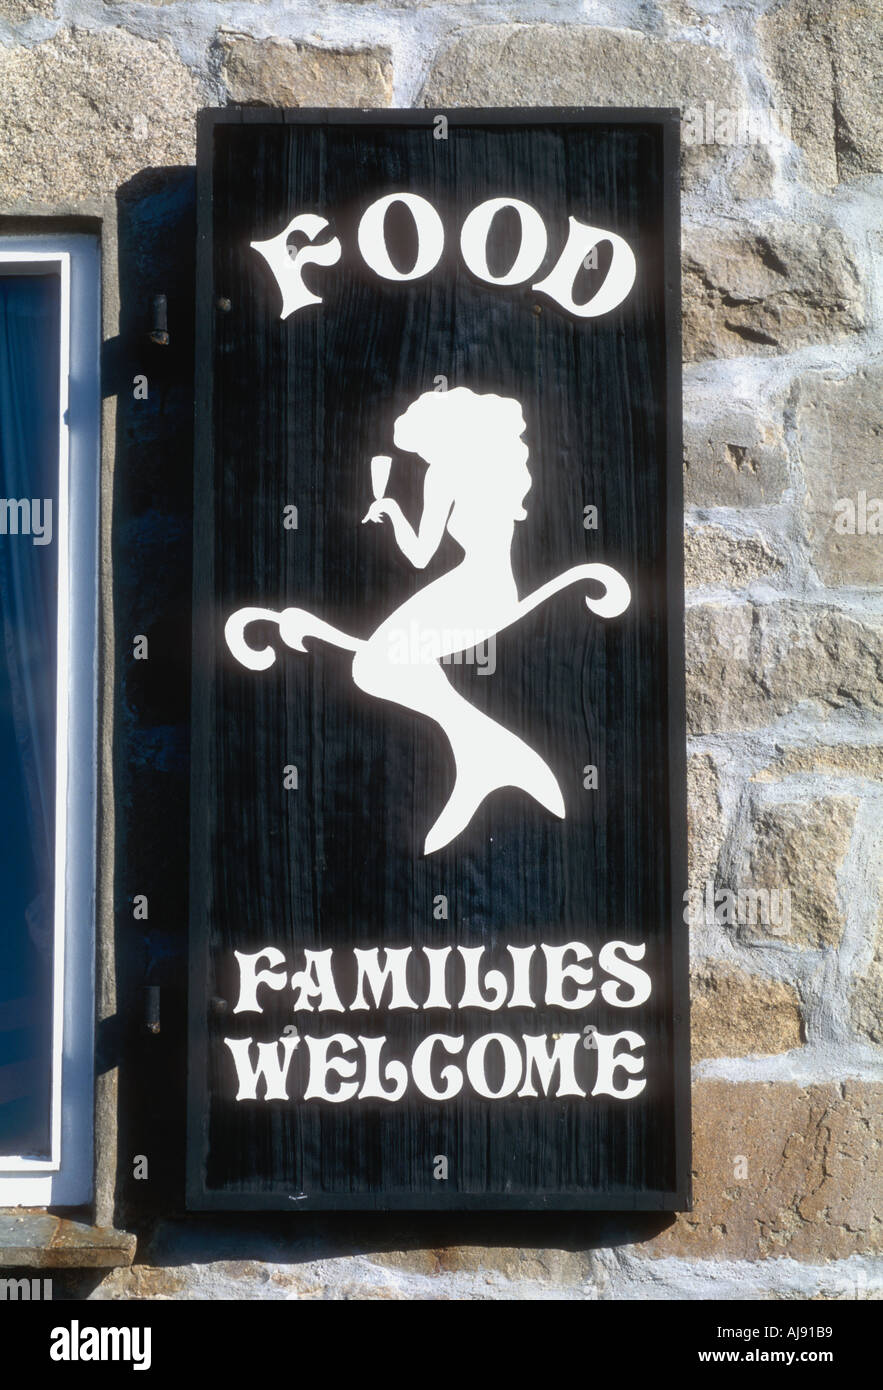 Advert on window shutter at the Mermaid pub on St Marys island Isles of Scilly England UK Stock Photo